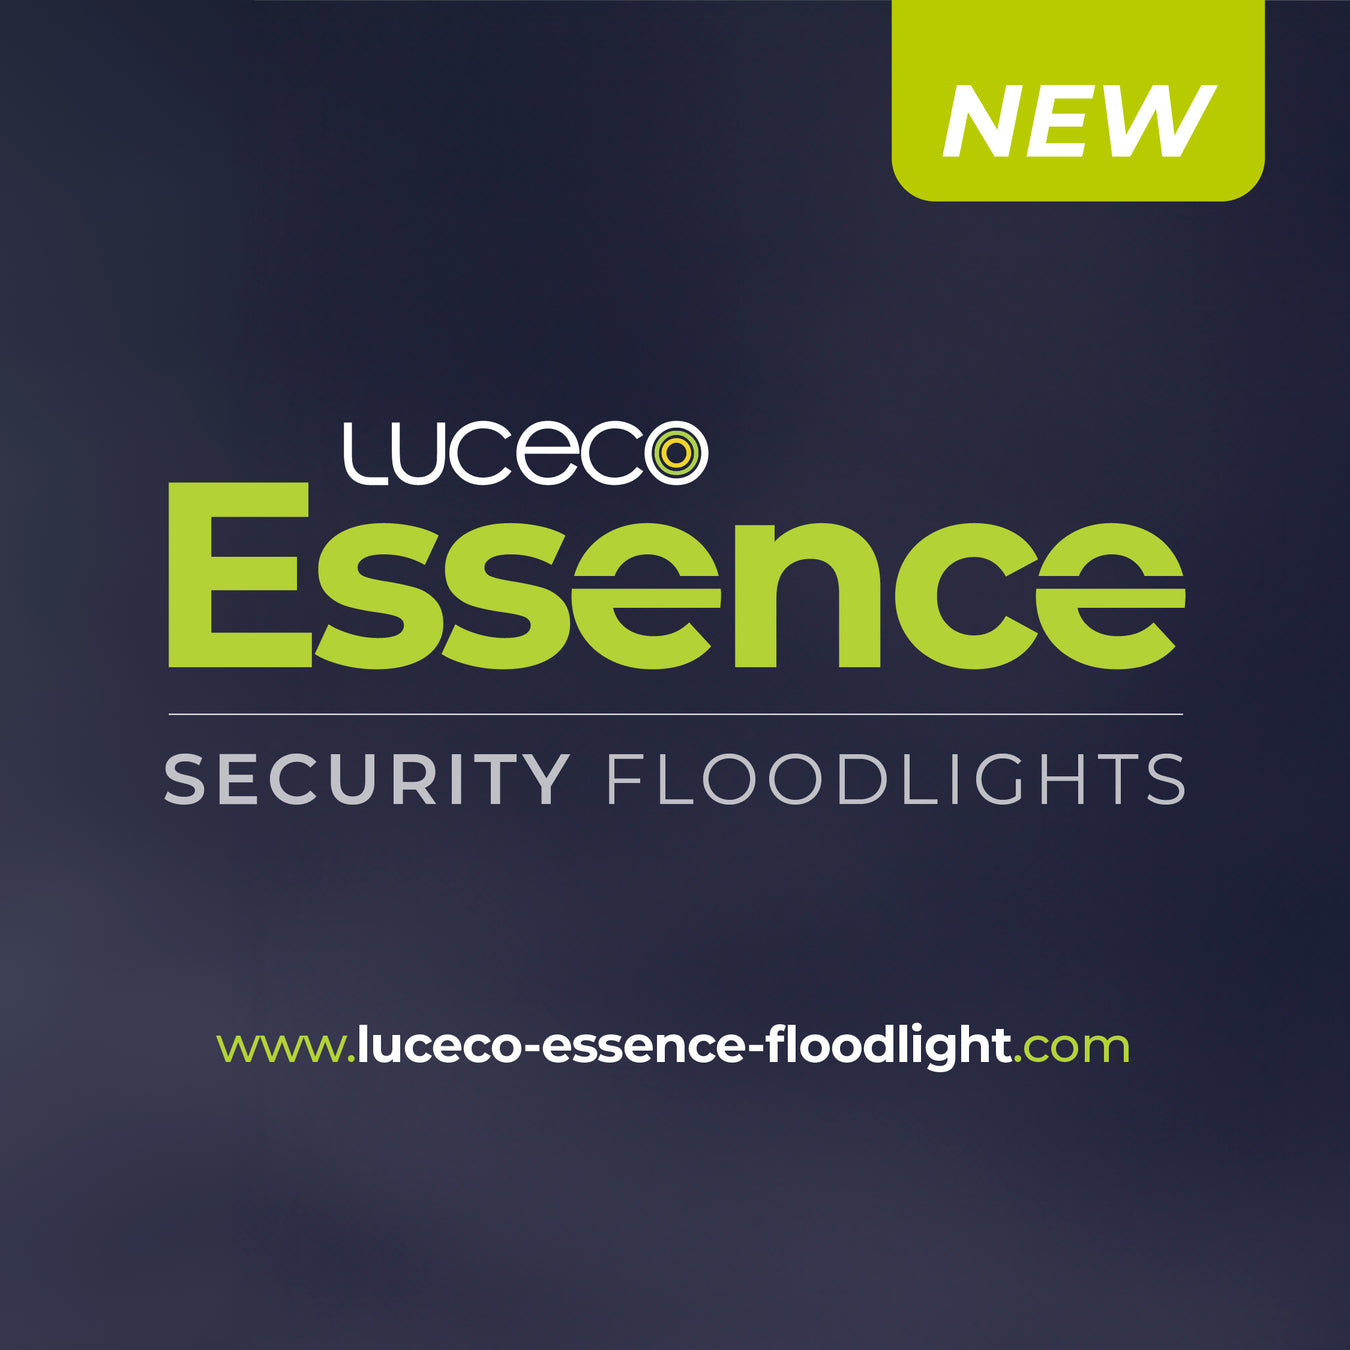 Luceco Essence Security Floodlights